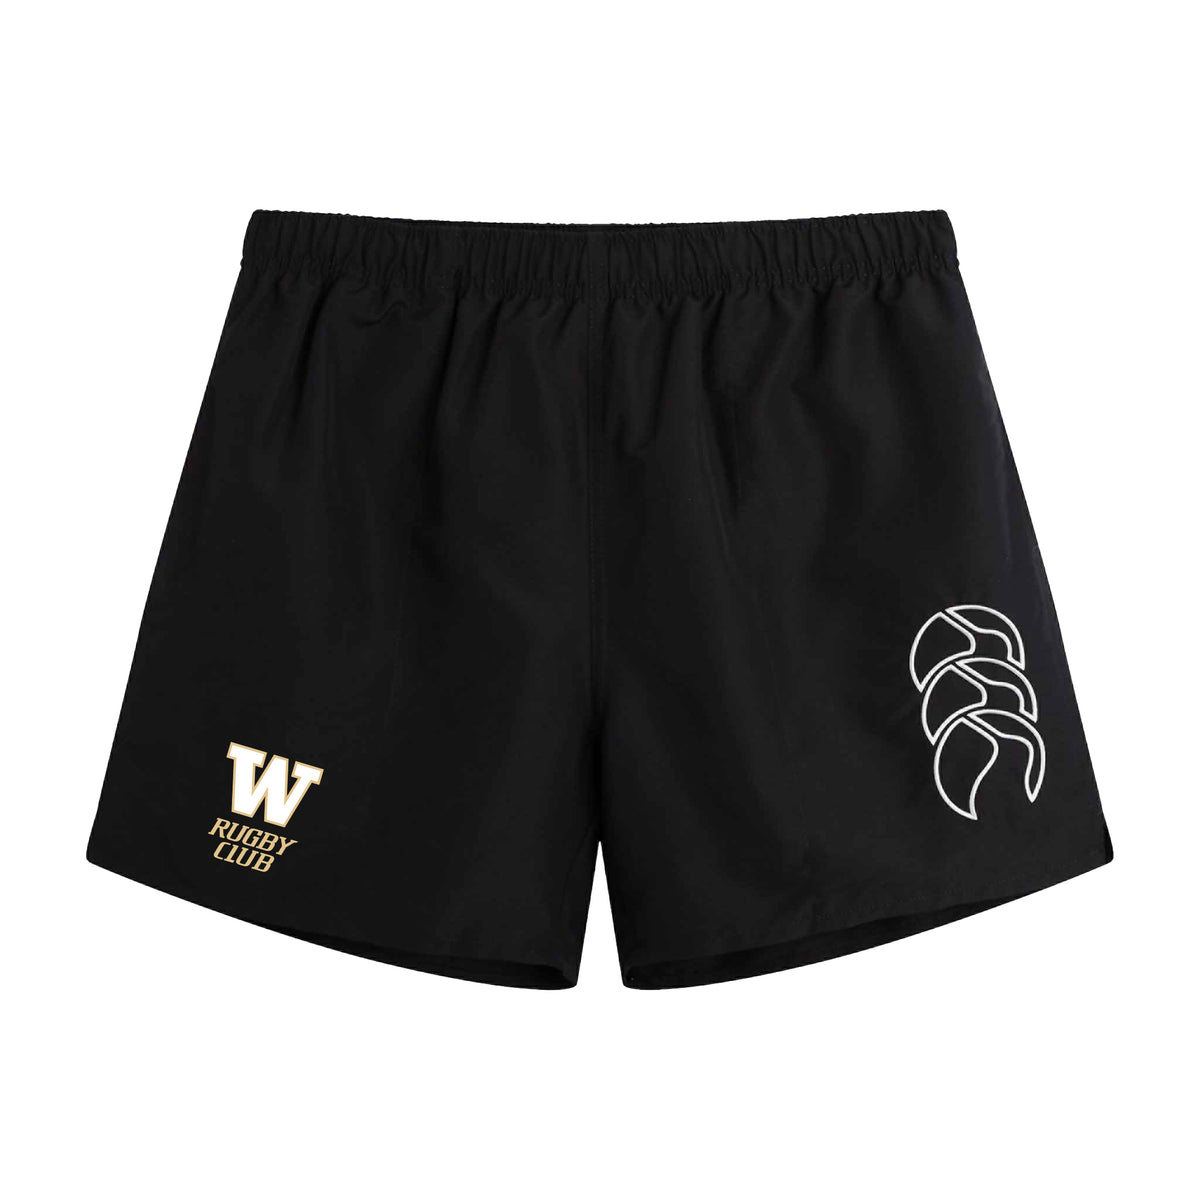 UW Women&#39;s Huskies Rugby Club Canterbury Tactic Shorts - Adult Unisex - Black - The Rugby Shop The Rugby Shop UNISEX / BLACK / XS TRS Distribution Canada SHORTS UW Women&#39;s Huskies Rugby Club Canterbury Tactic Shorts - Adult Unisex - Black